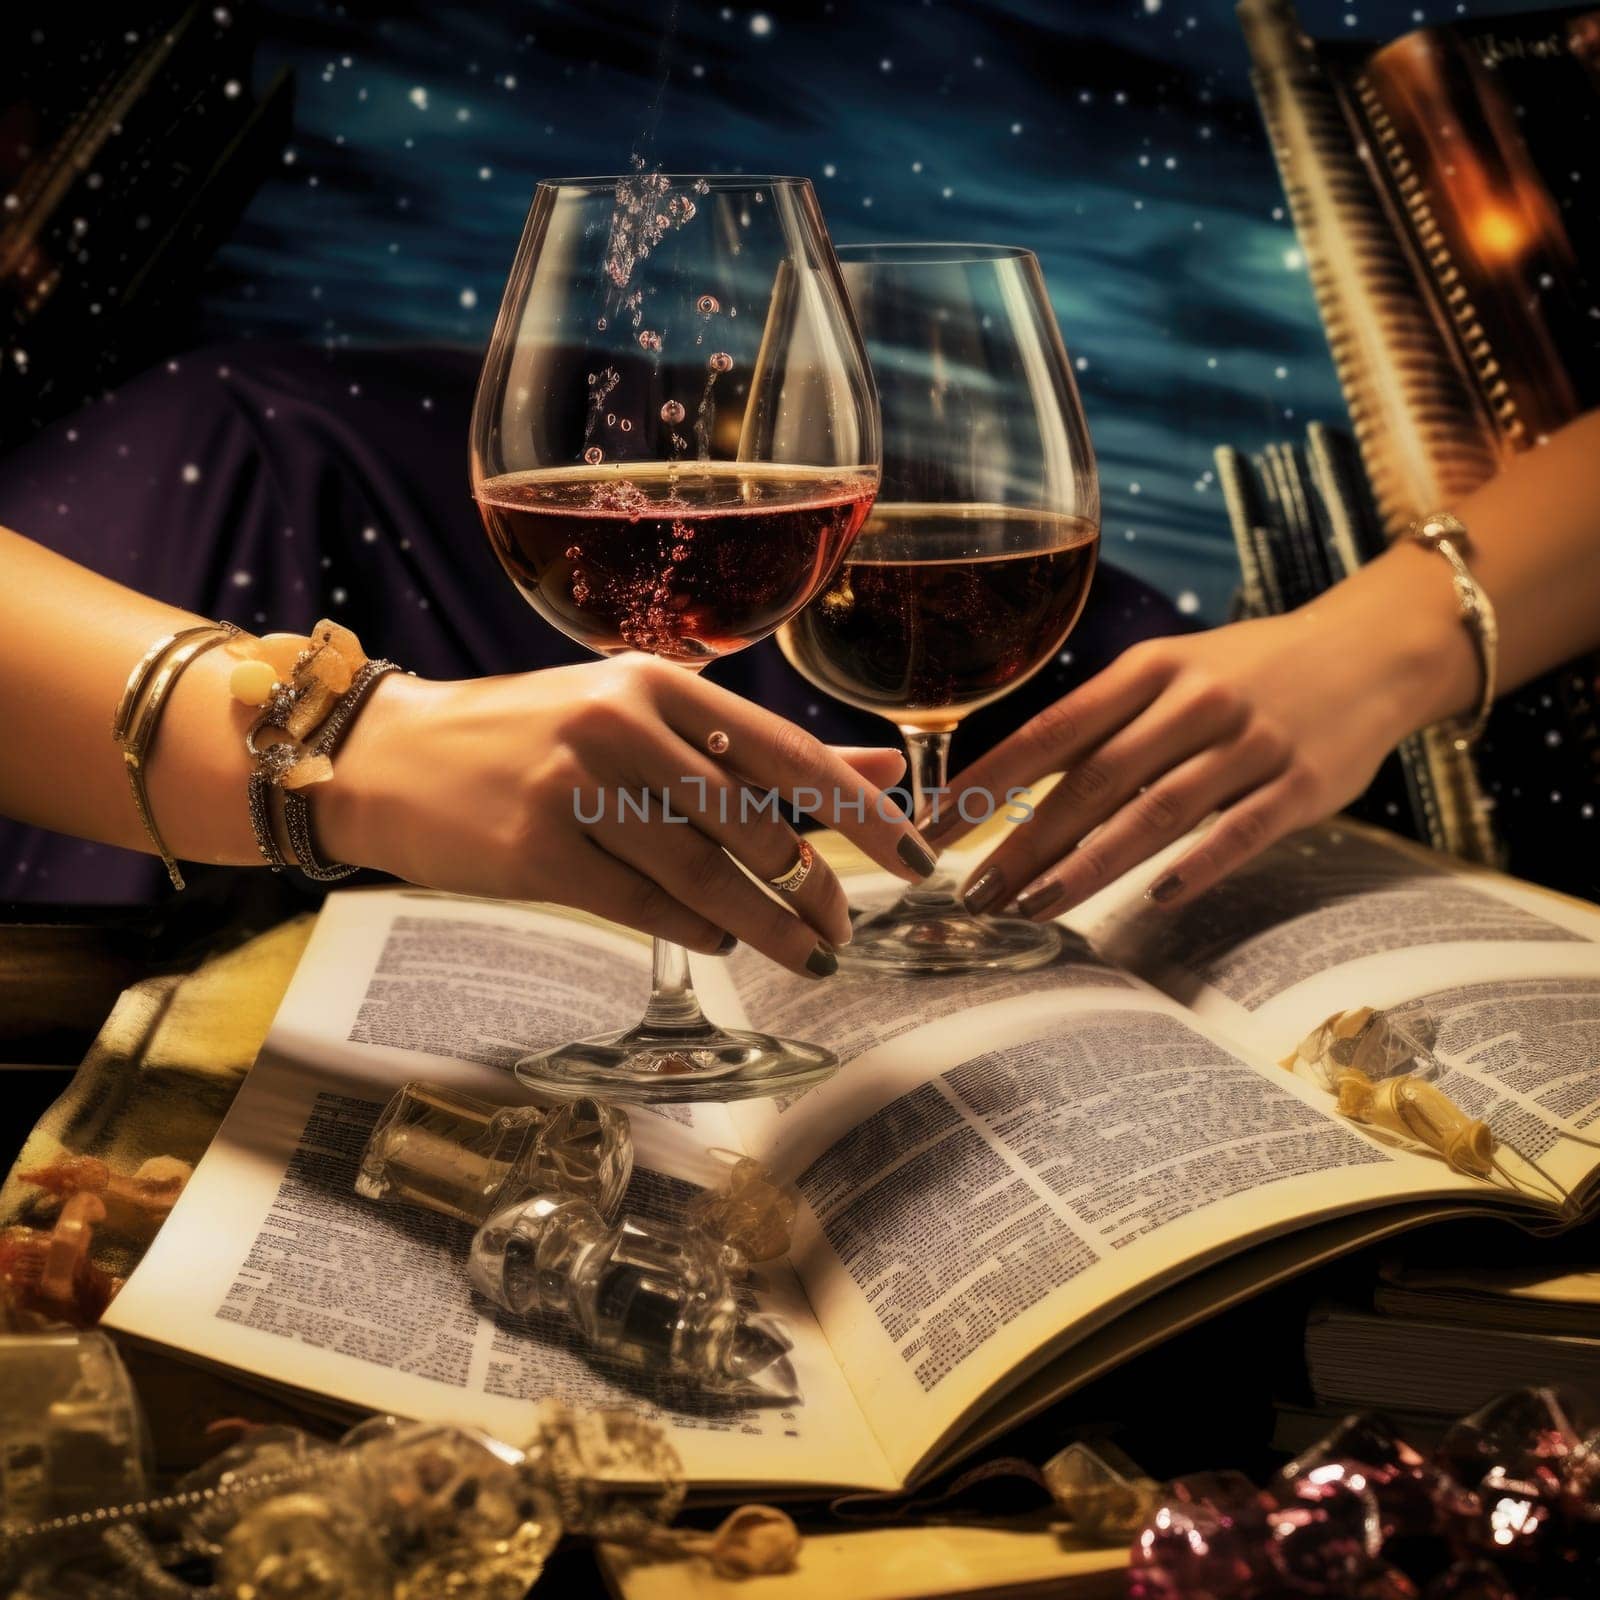 A girl and a guy relax as they hold wine glasses and peruse a book.